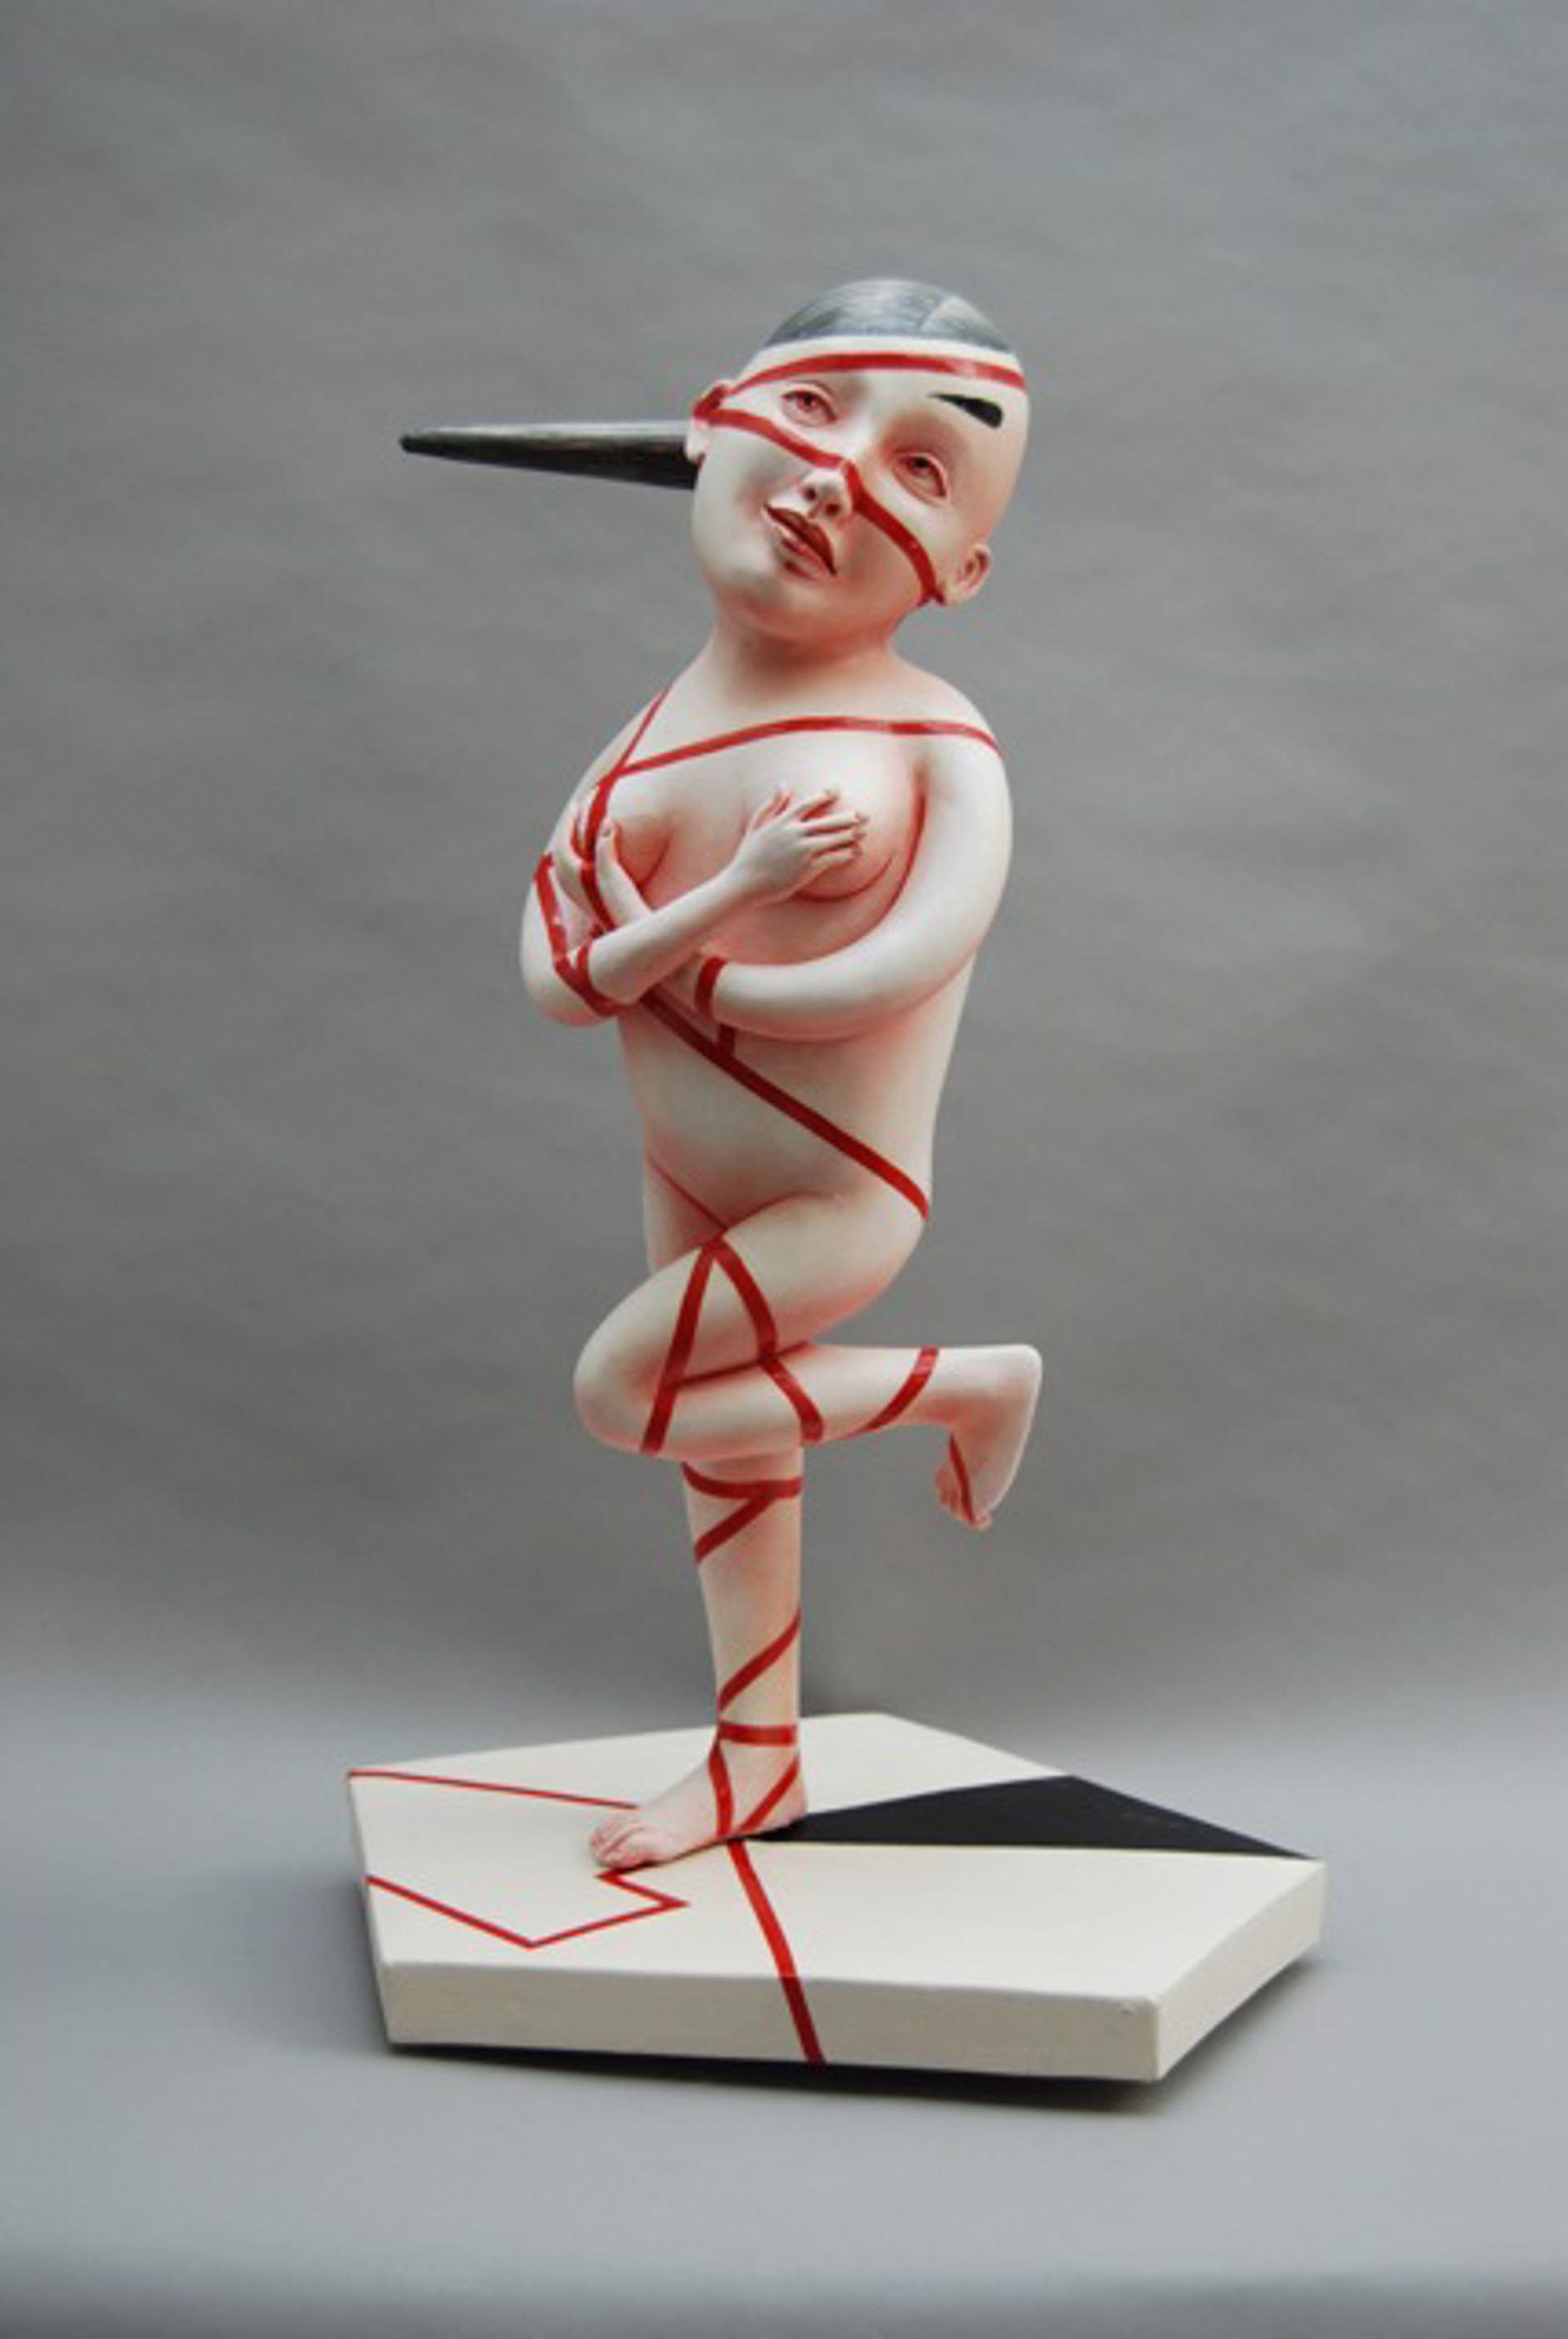 TIED UP IN RED TAPE by Patti Warashina